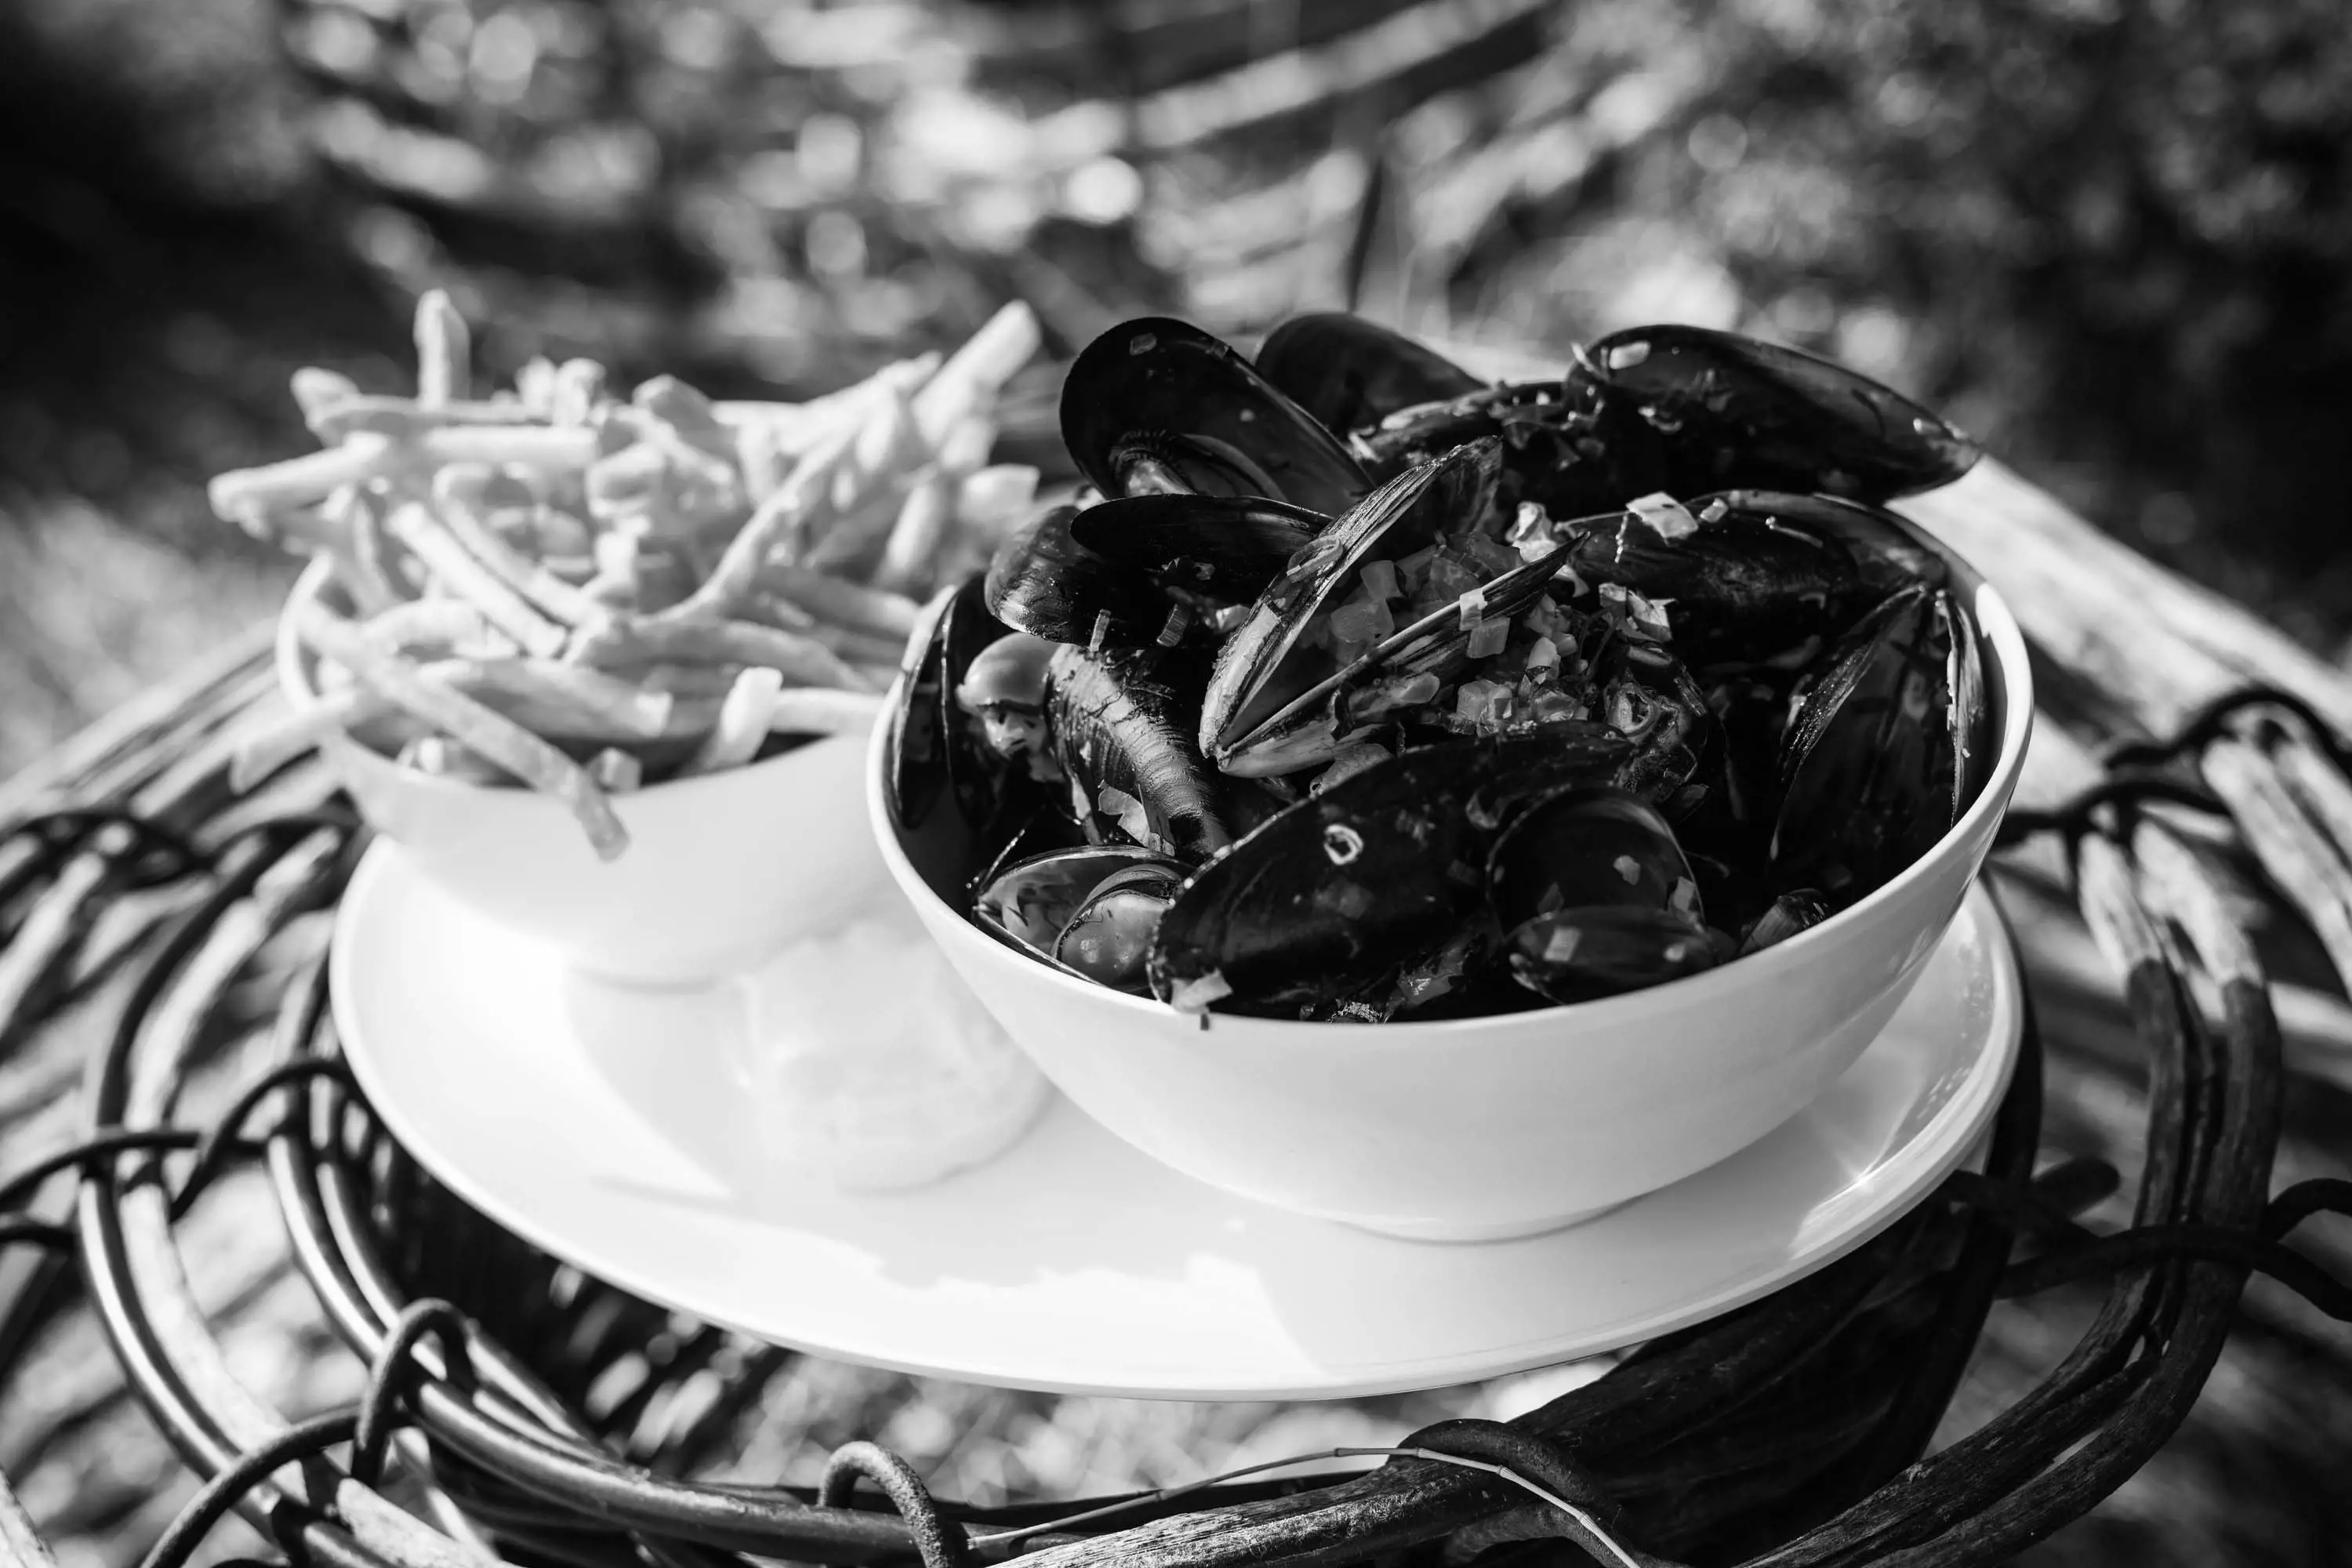 A bowl of black shelled mussels and freshly fried chips presented in the top of a crayfish pot made of curved wood and fastened with wire.